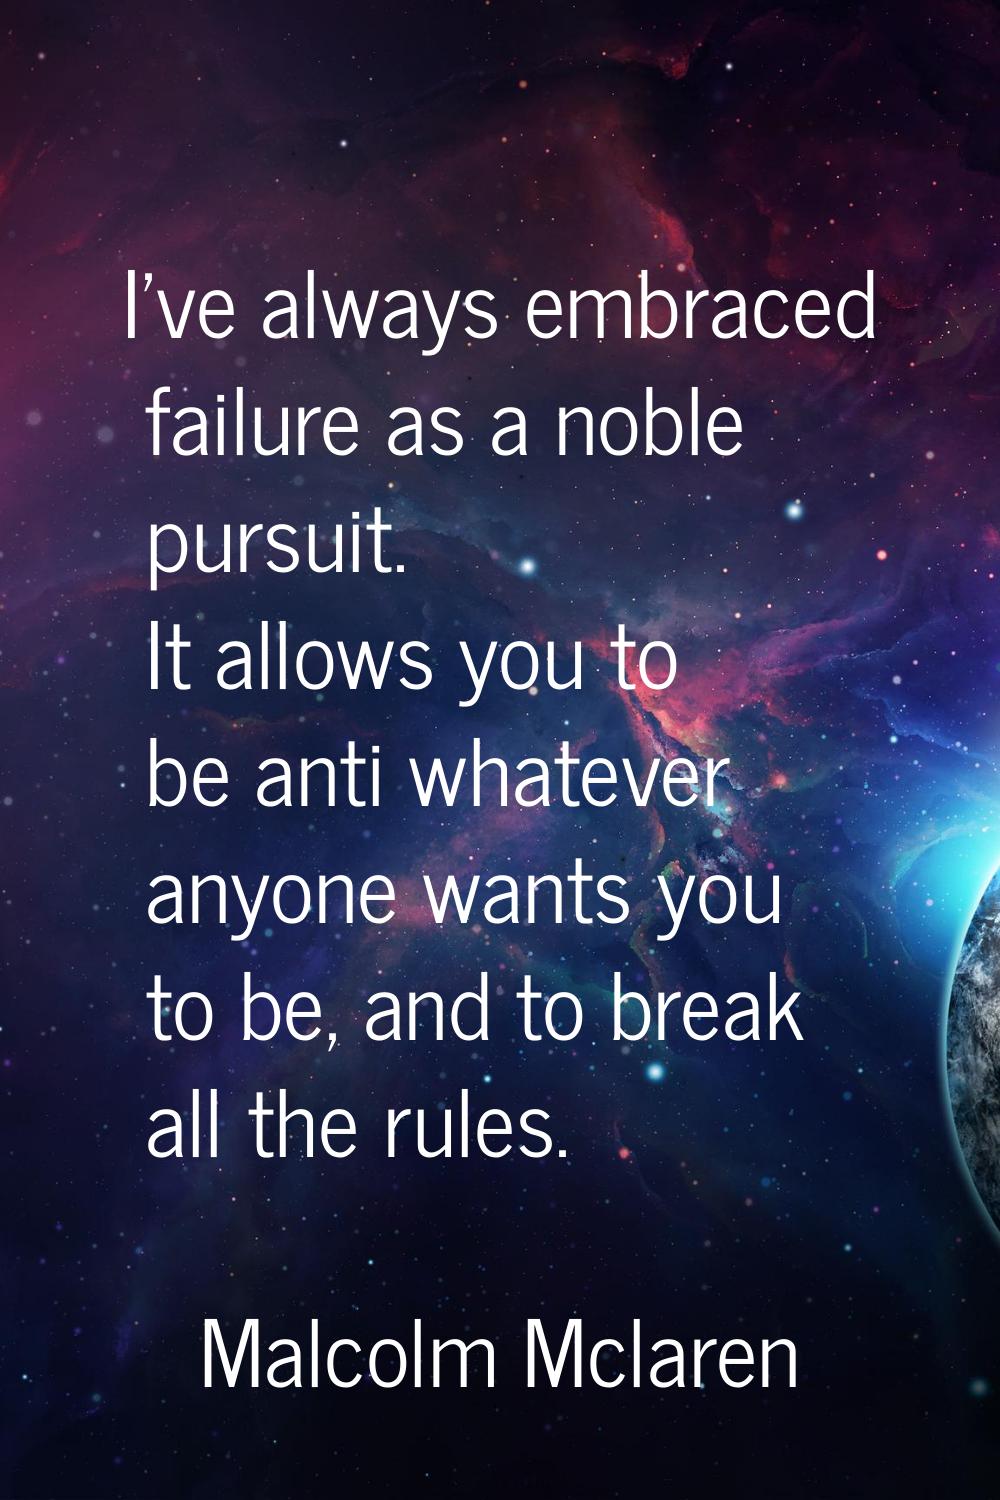 I've always embraced failure as a noble pursuit. It allows you to be anti whatever anyone wants you